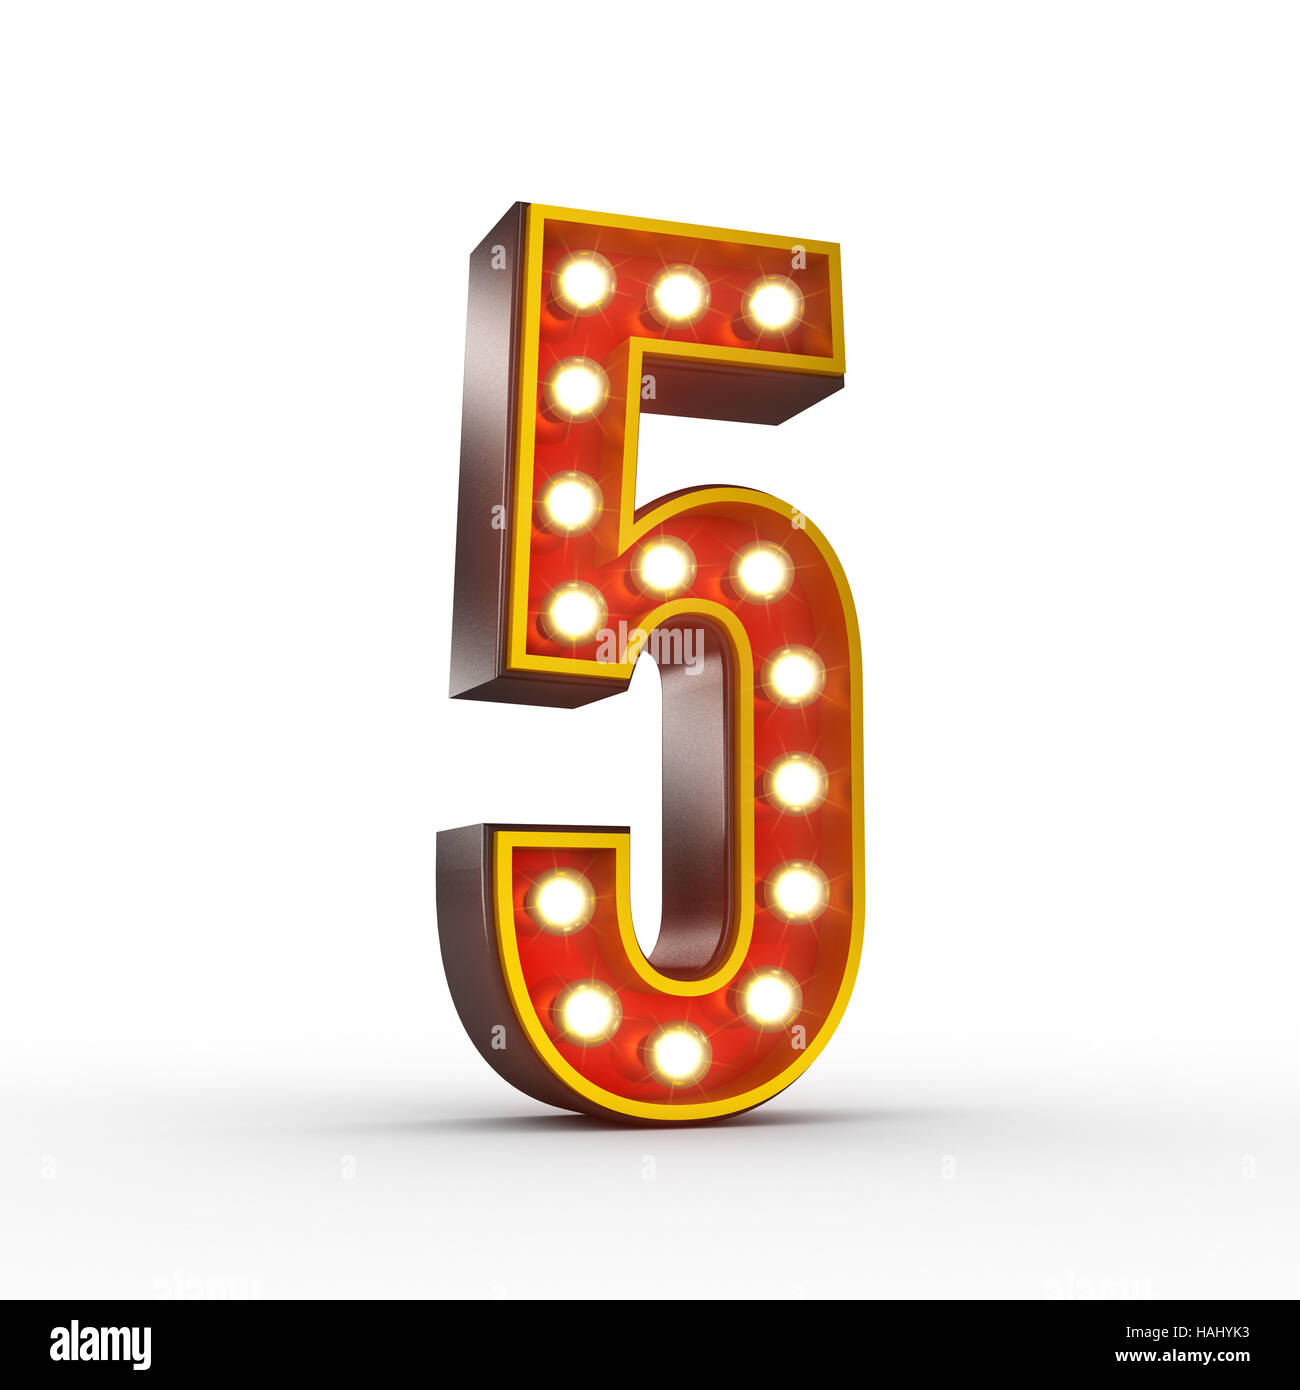 High quality 3D illustration of the number five in vintage style with light bulbs illuminating it. Clipping path included. Stock Photo